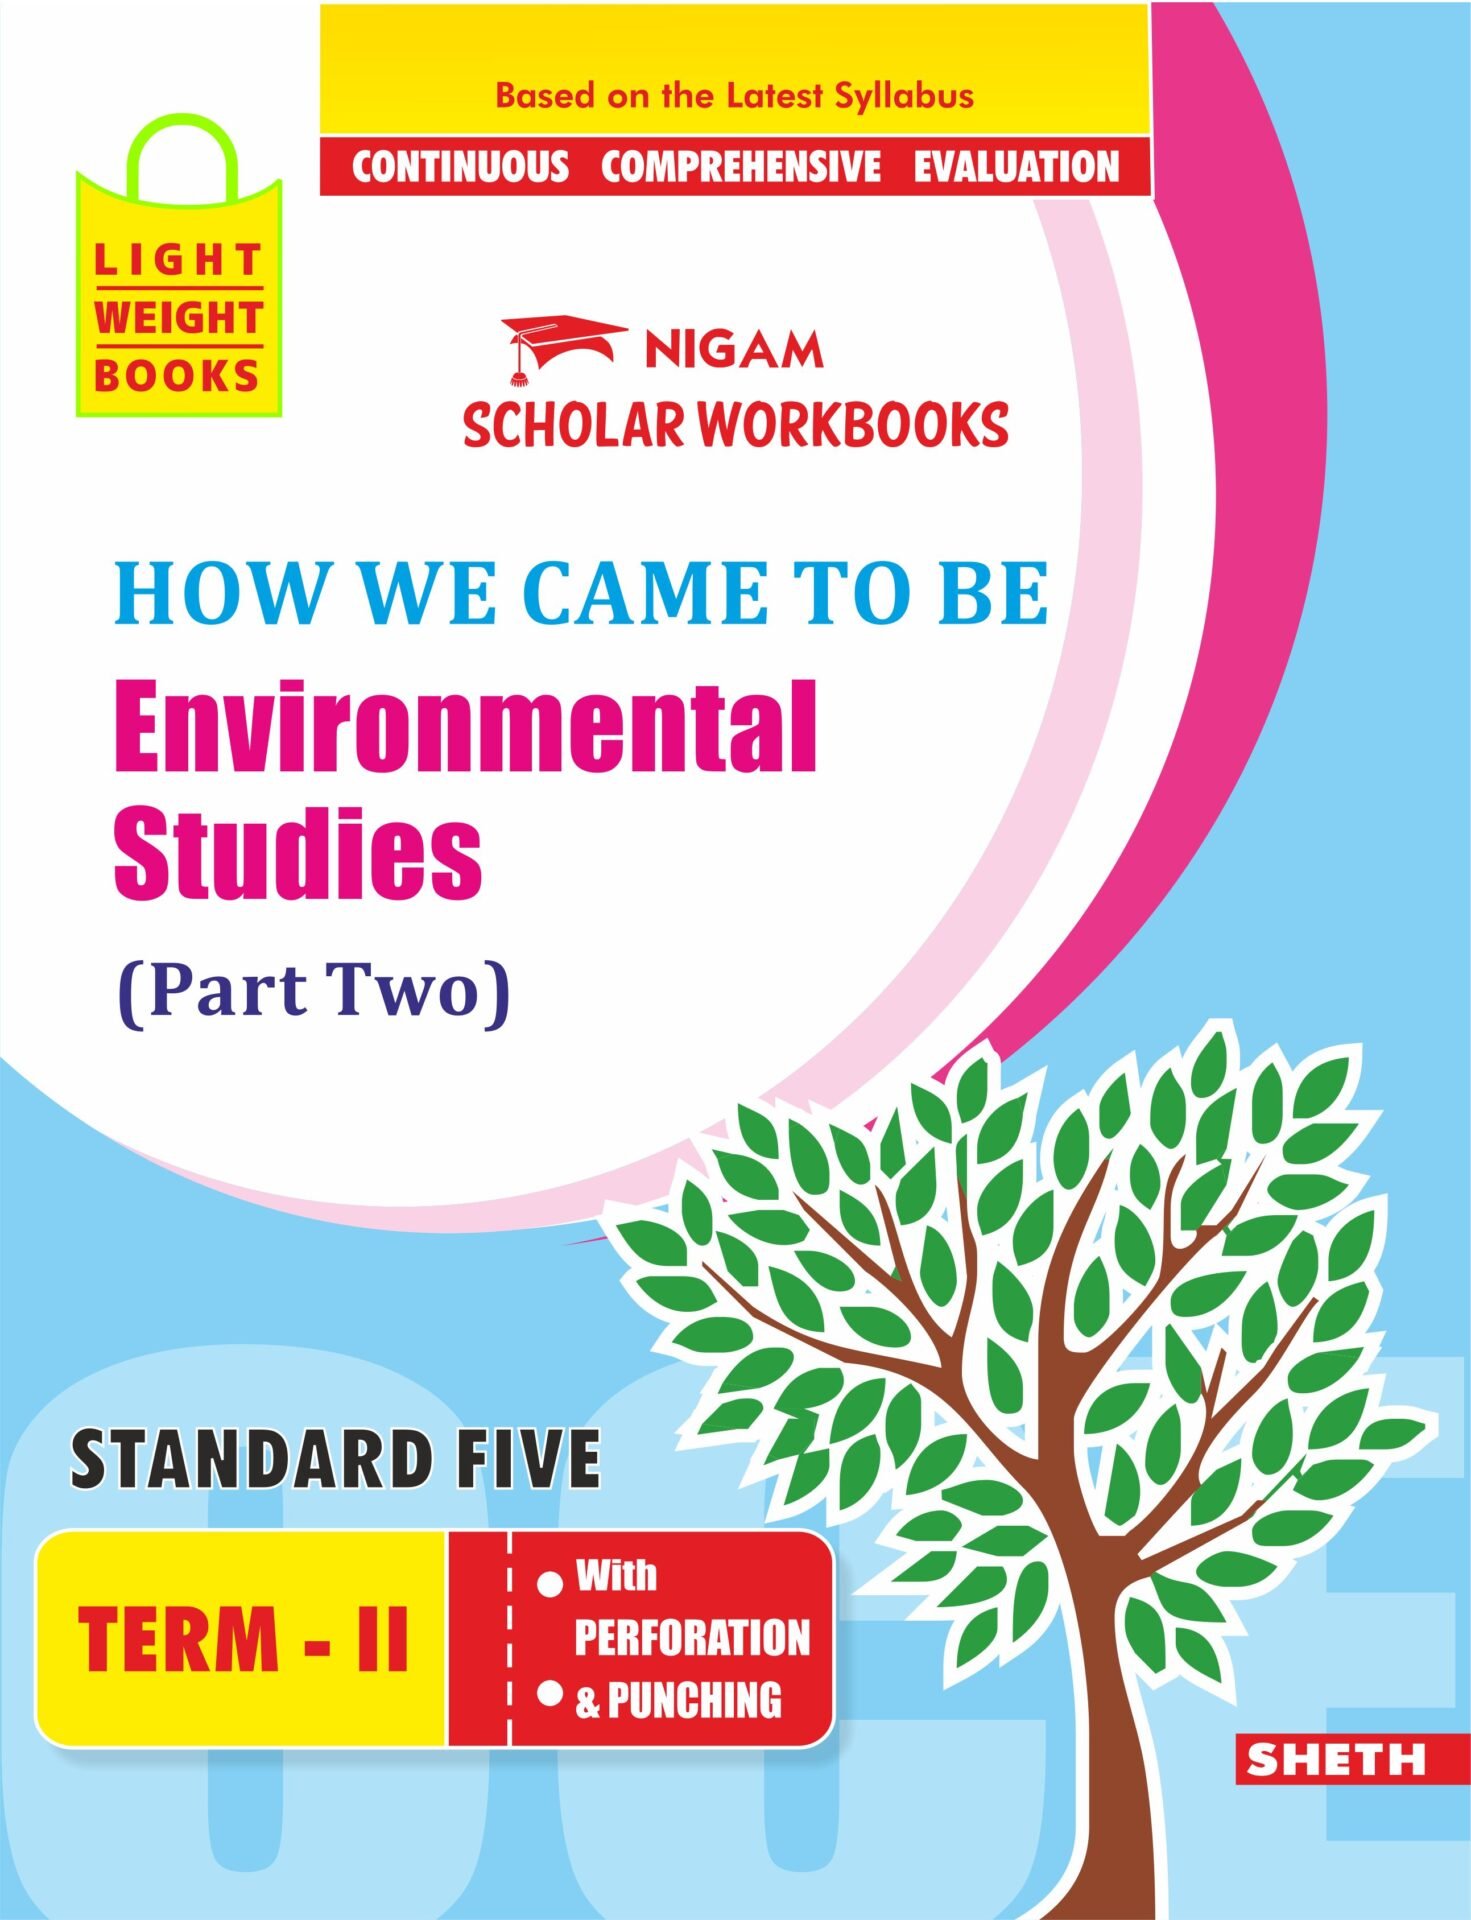 CCE Pattern Nigam Scholar Workbooks How We Came to Be Environmental Studies EVS Part Two Standard 5 Term 2 1